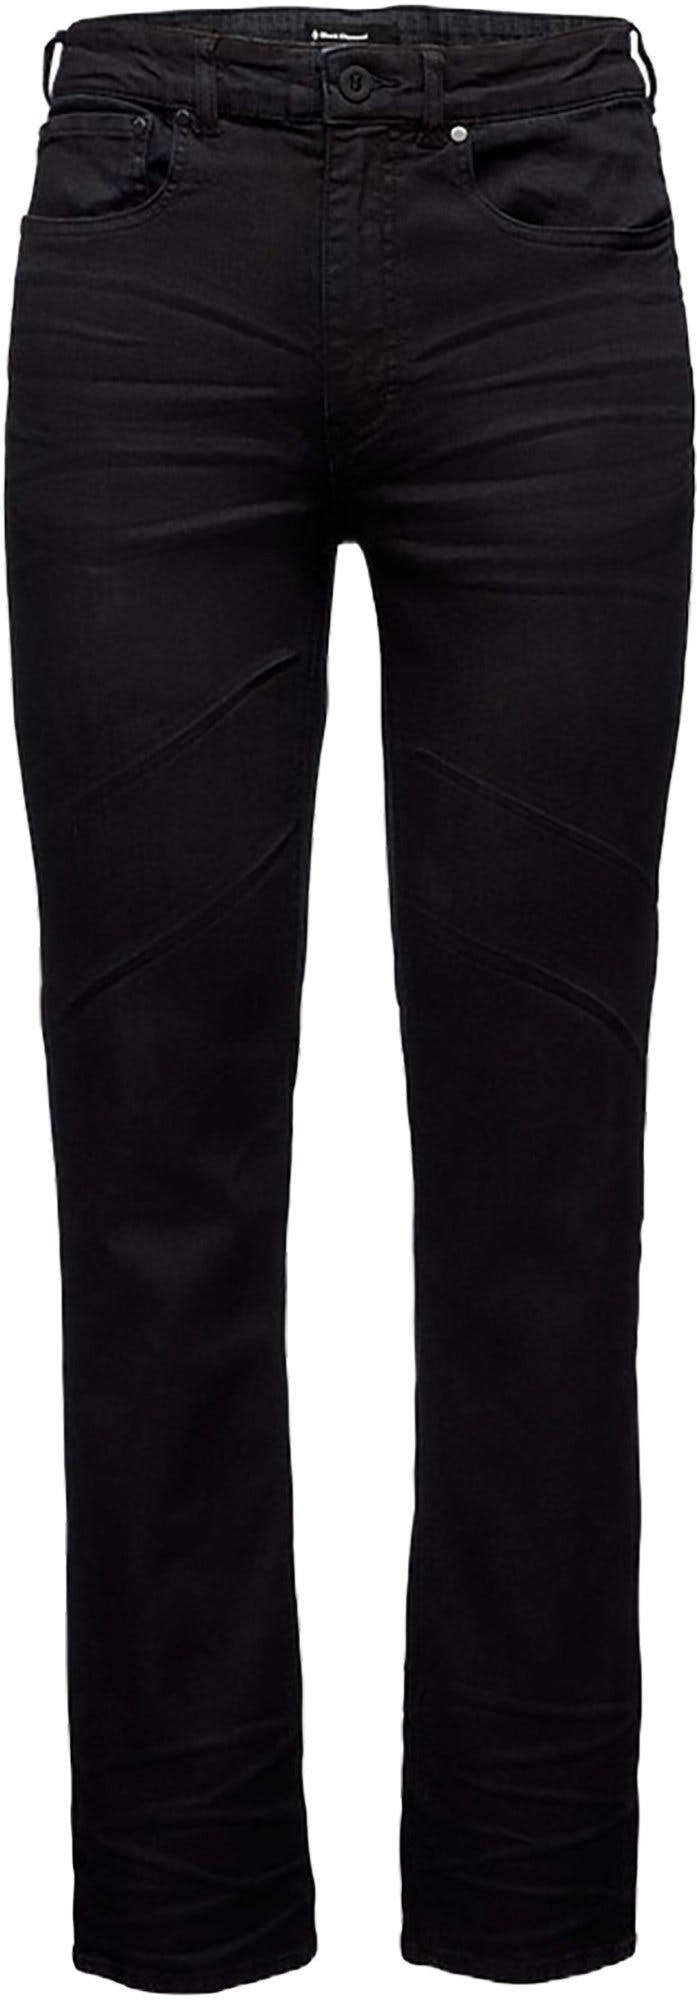 Product image for Forged Denim Pants - Men's